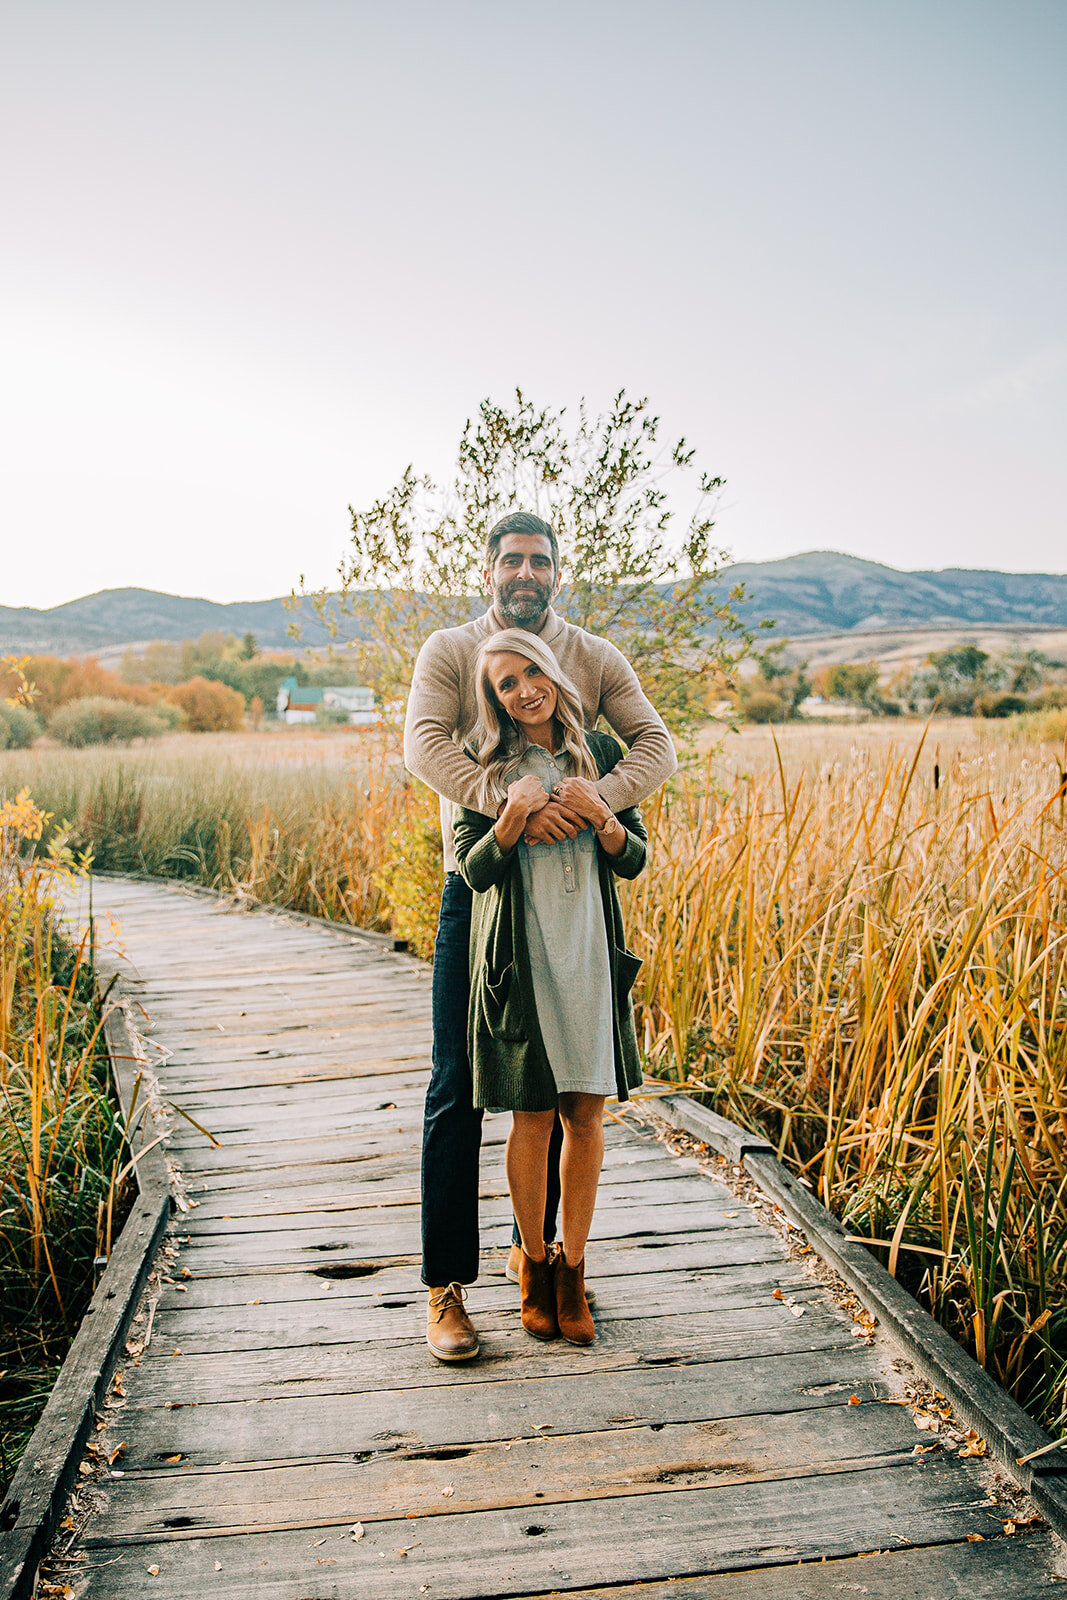  family of two man hugging woman from behind and smiling family pictures garden city park bear lake utah together again fields of gold mountains lakeside photos professional photographers in utah utah family photographers extended family siblings fam